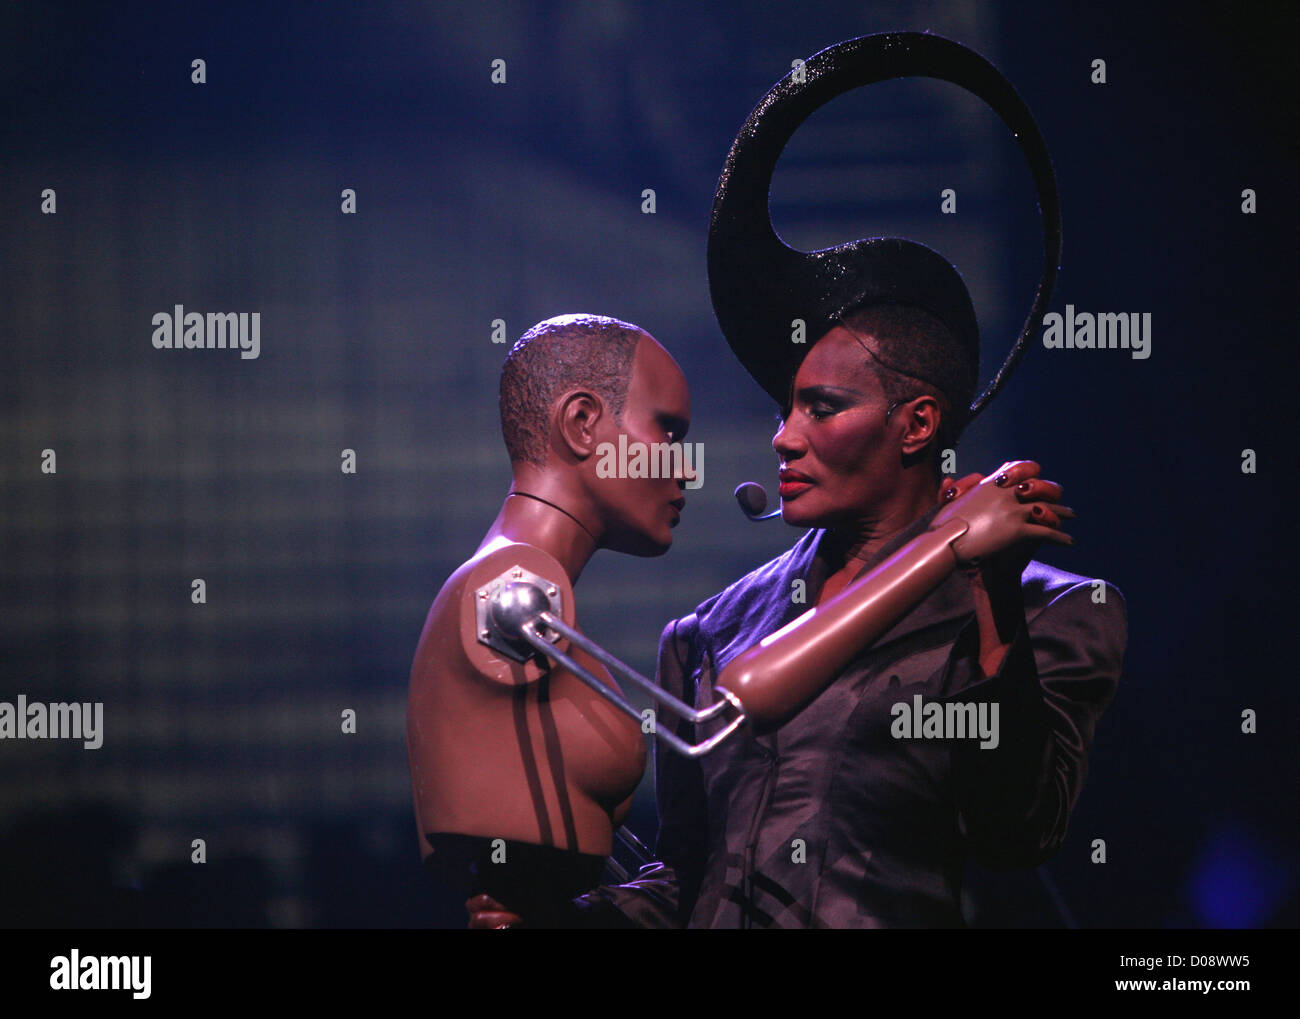 Grace Jones performs at Night Of The Proms at GelreDome Arnhem, The Netherlands - 13.11.10 Stock Photo